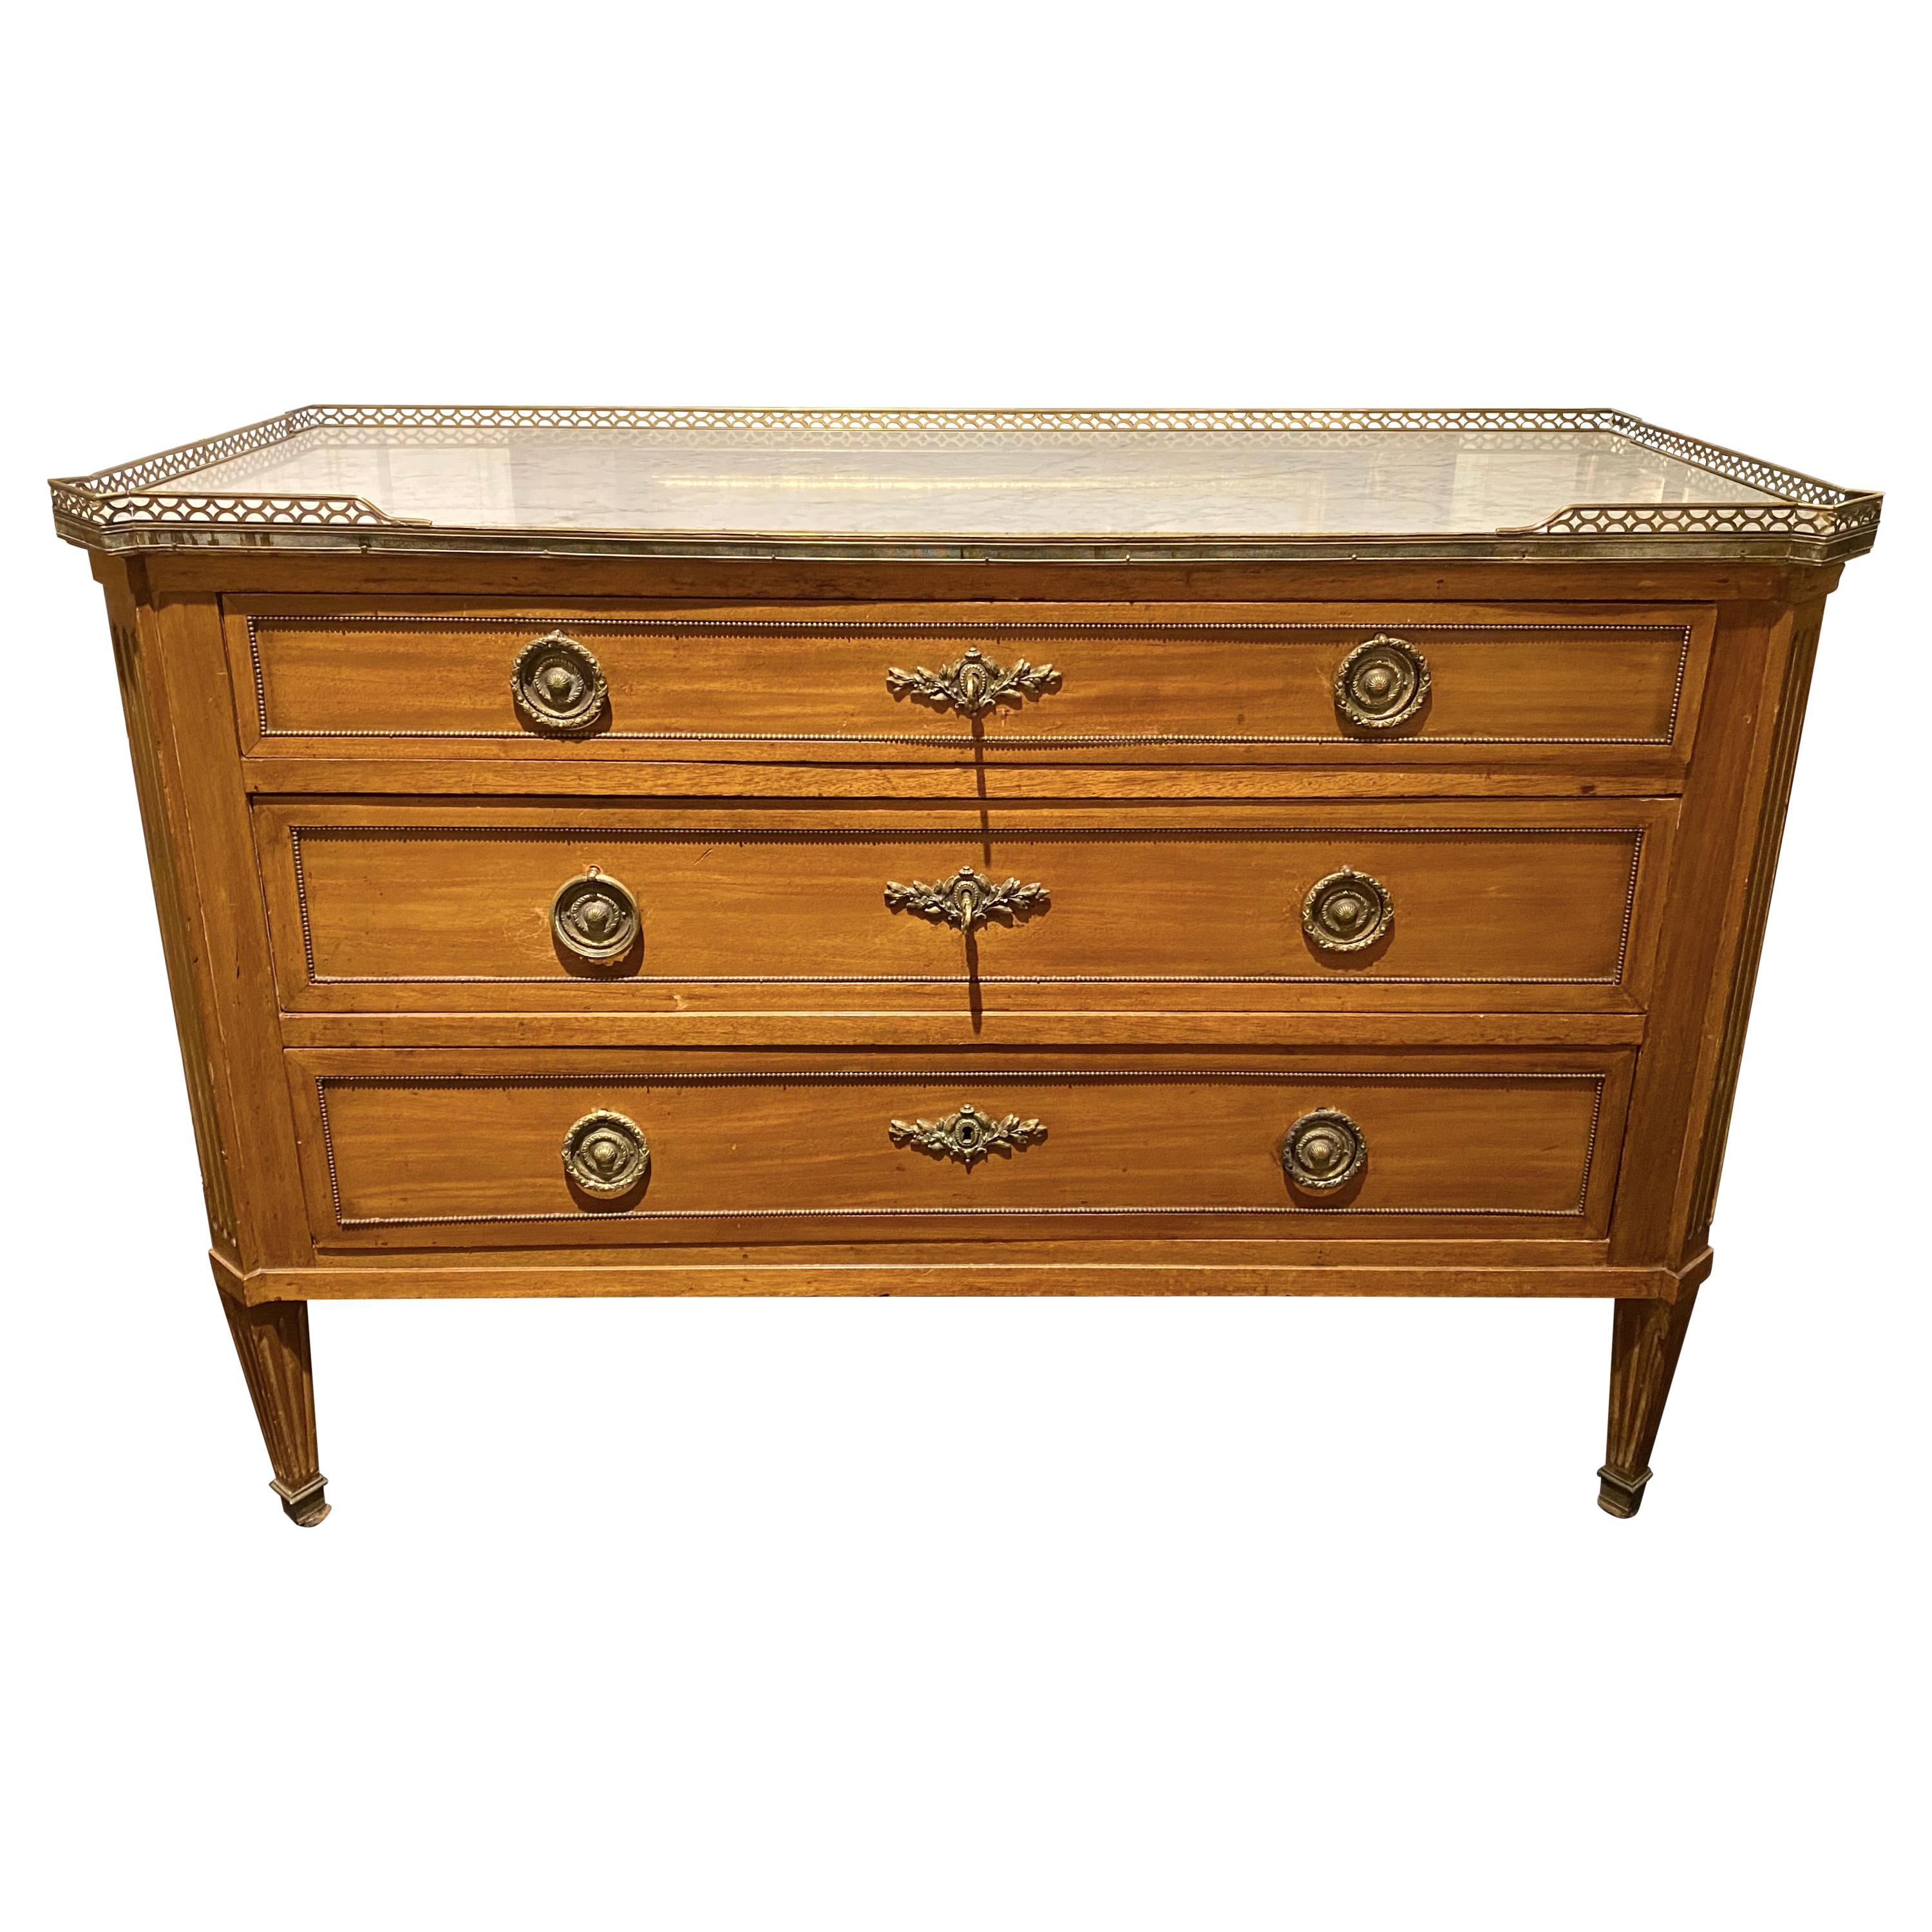 Louis XVI Style Commode Dresser, Marble-Top with Bronze Frieze, Pale Golden Wood For Sale